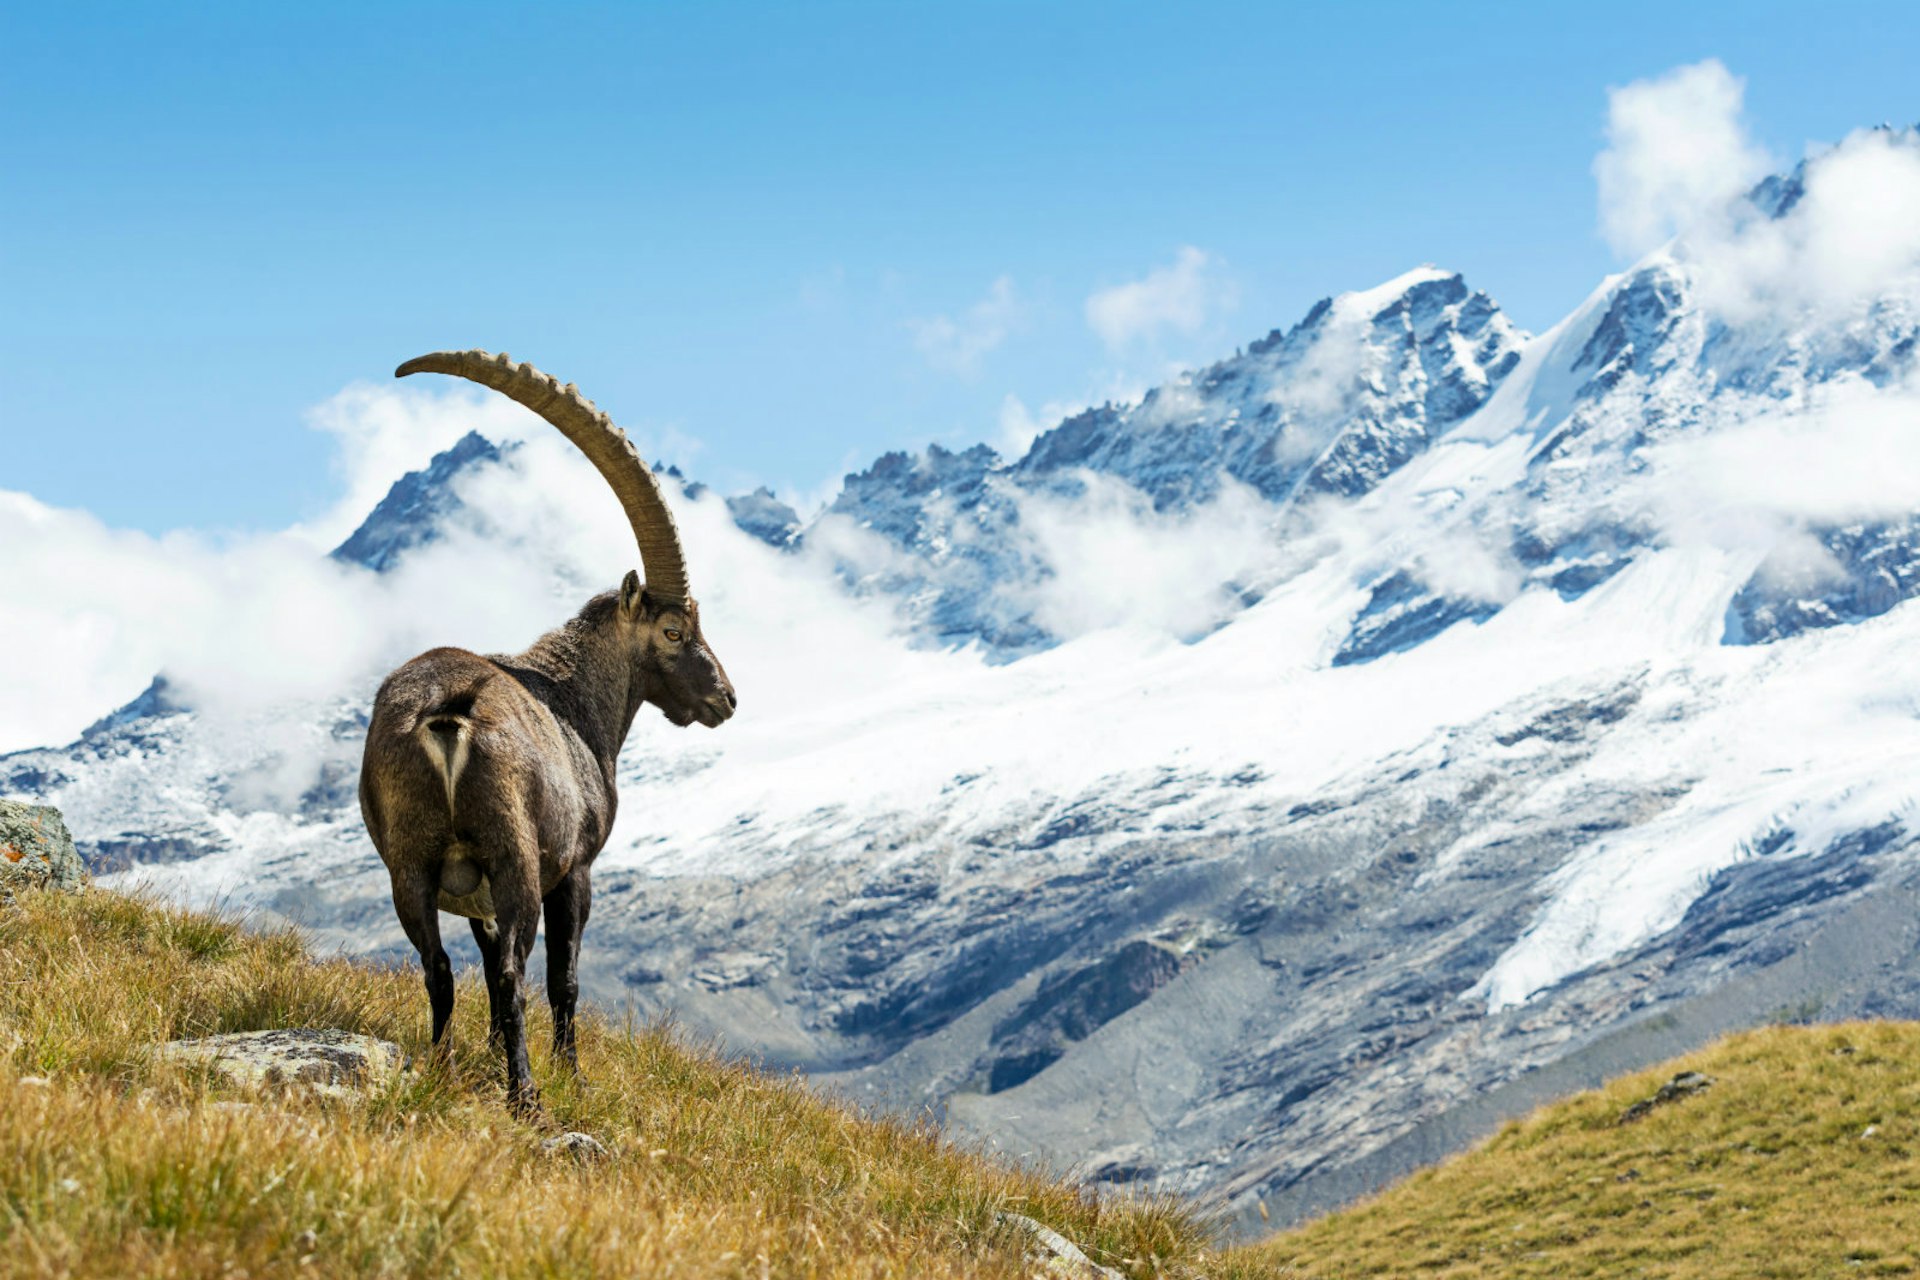 Hikers might meet ibex in Gran Paradiso – and wish they had their knack for scaling mountains © ueuaphoto / Getty Images